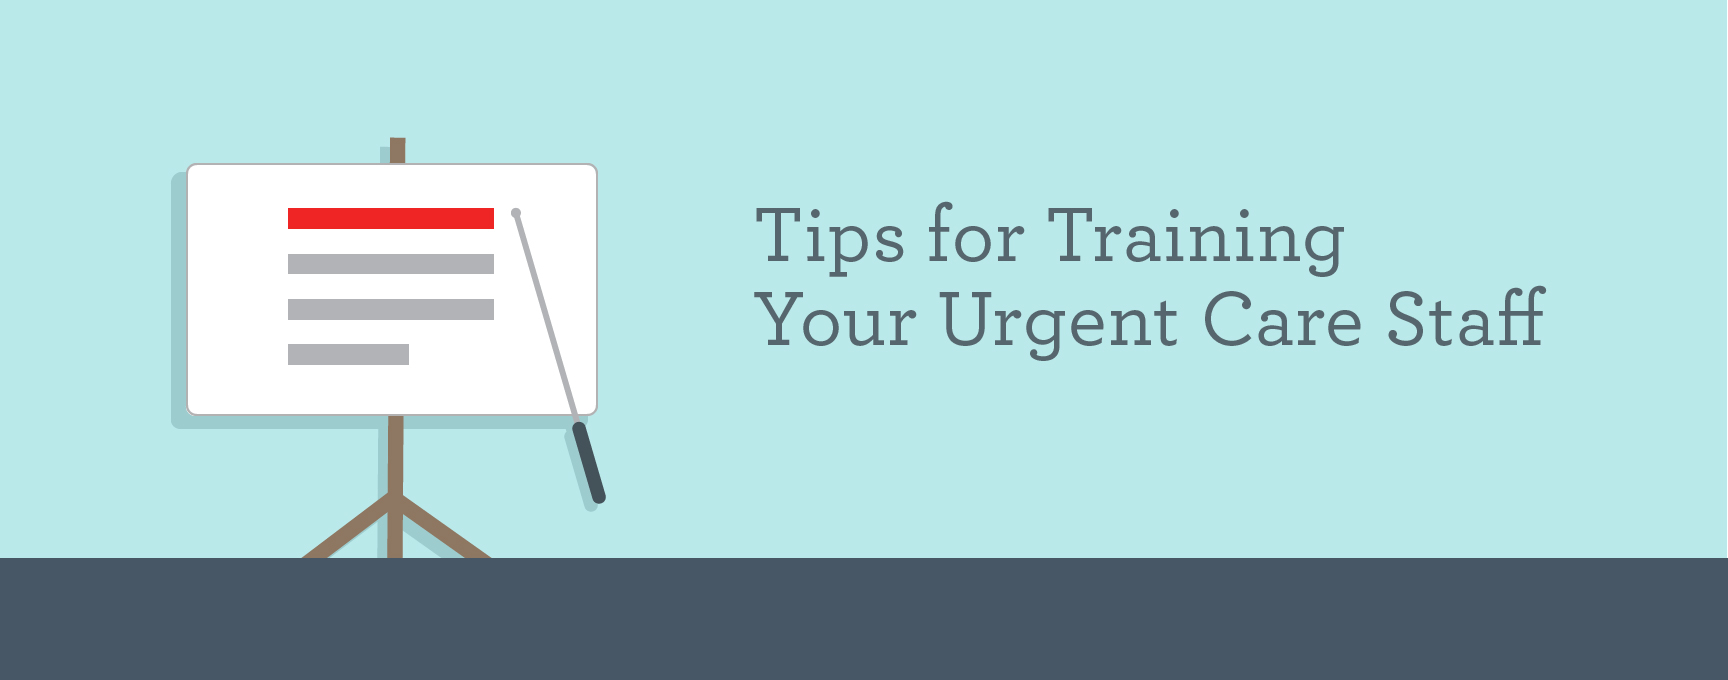 tips for training urgent care staff article banner